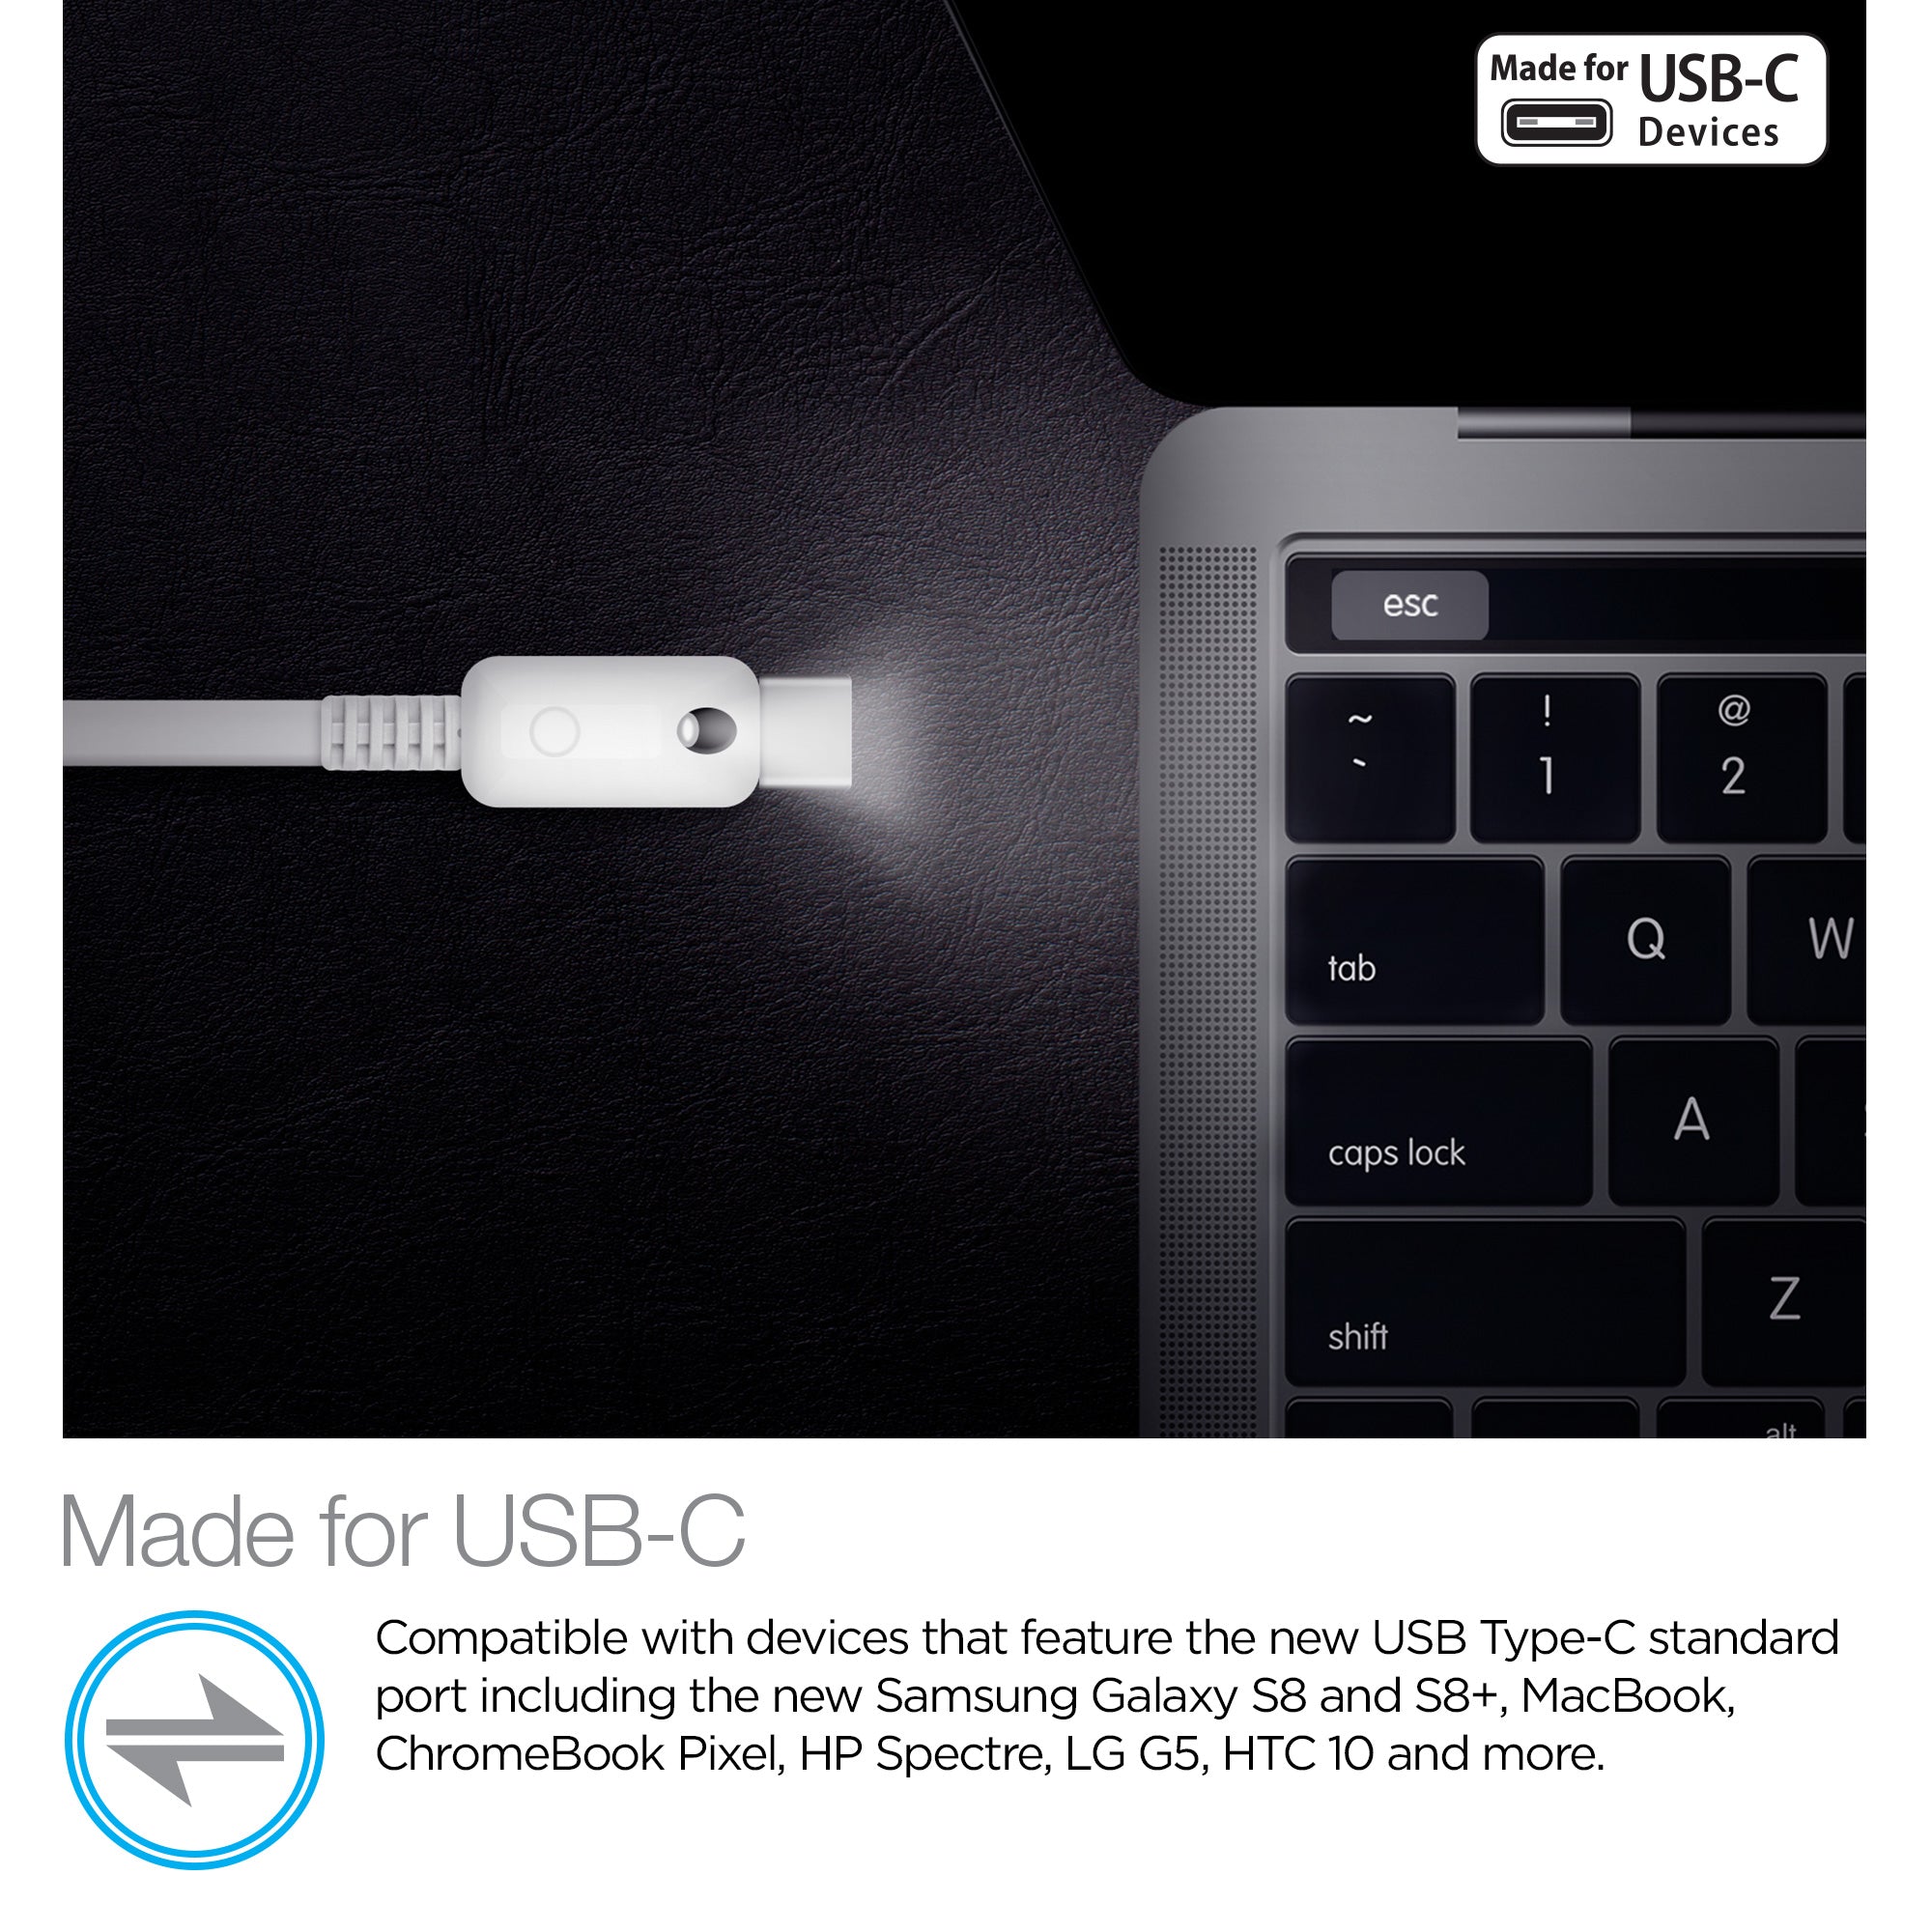 Lighted USB to USB-C Flat Cable | 6ft | White